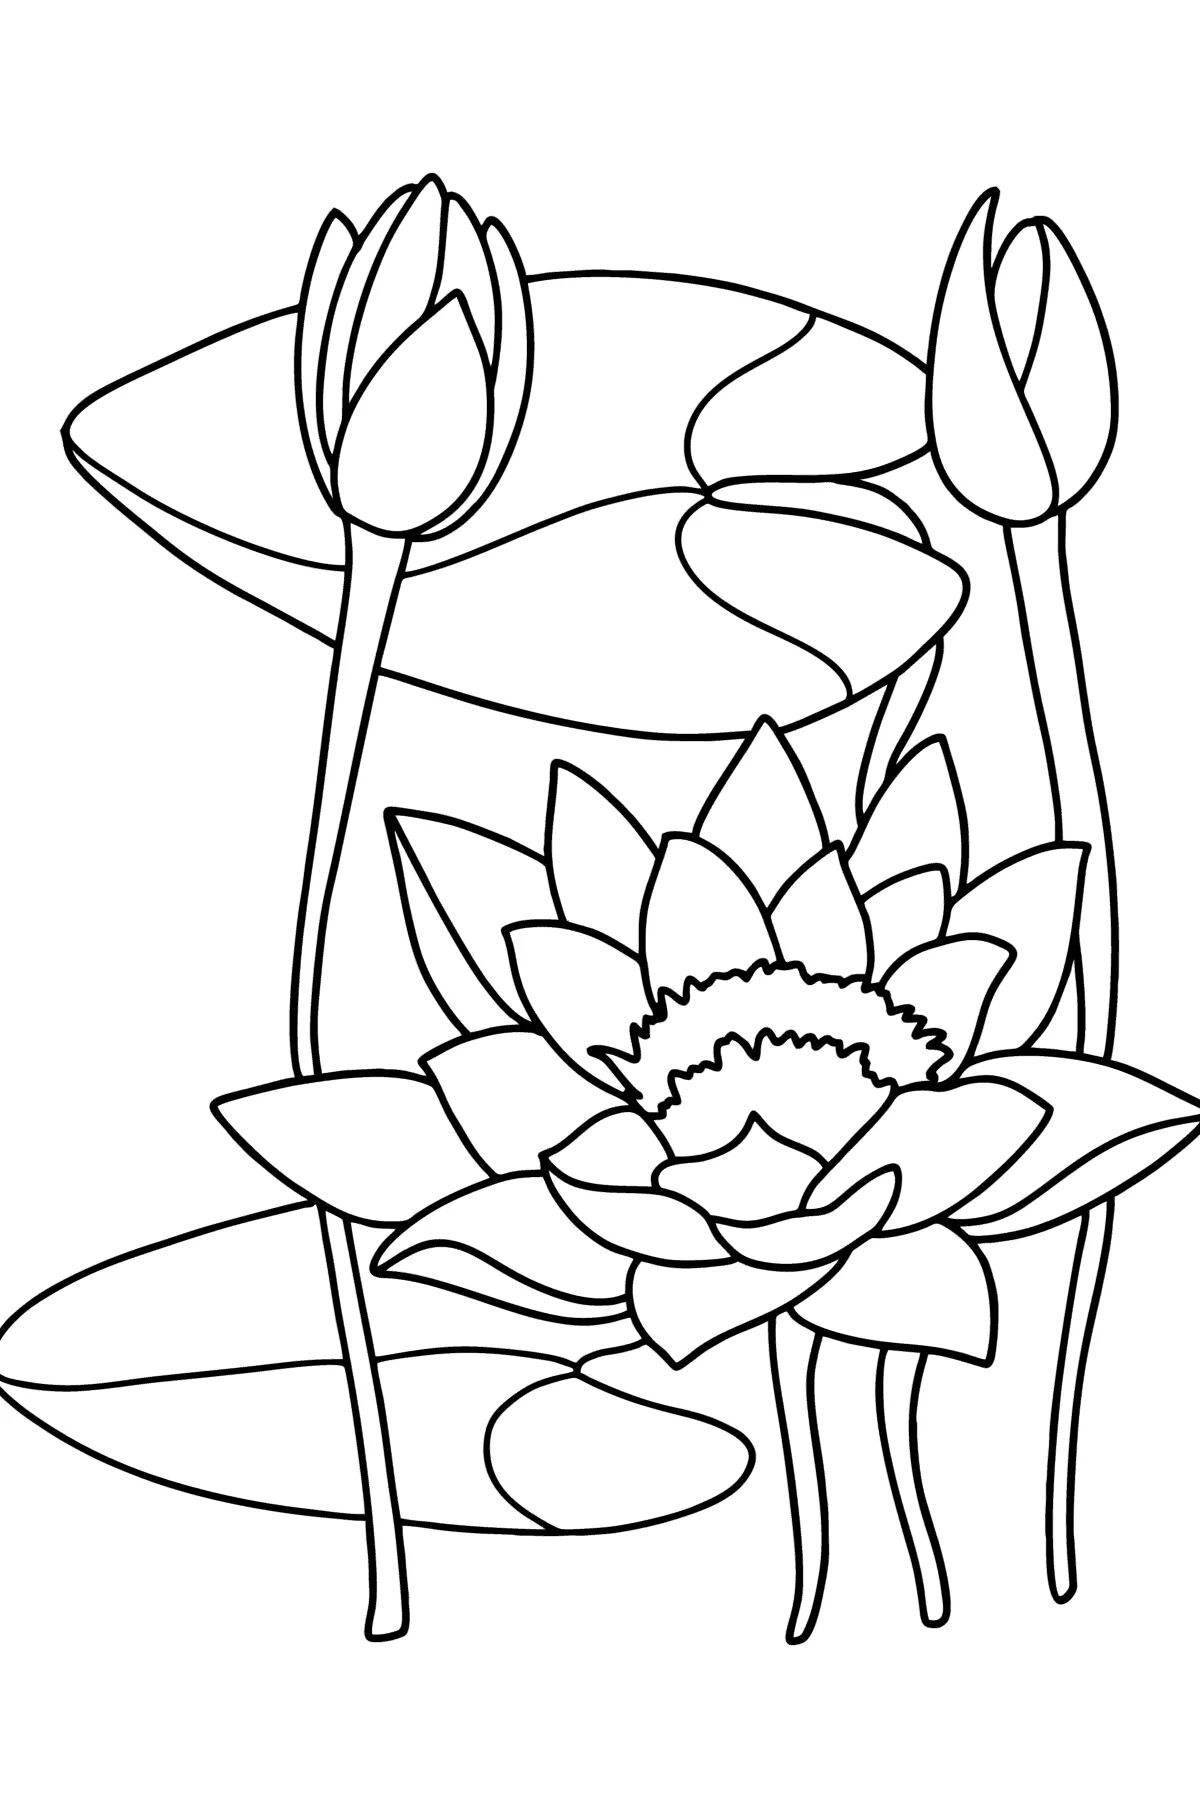 Lucky white water lily coloring page